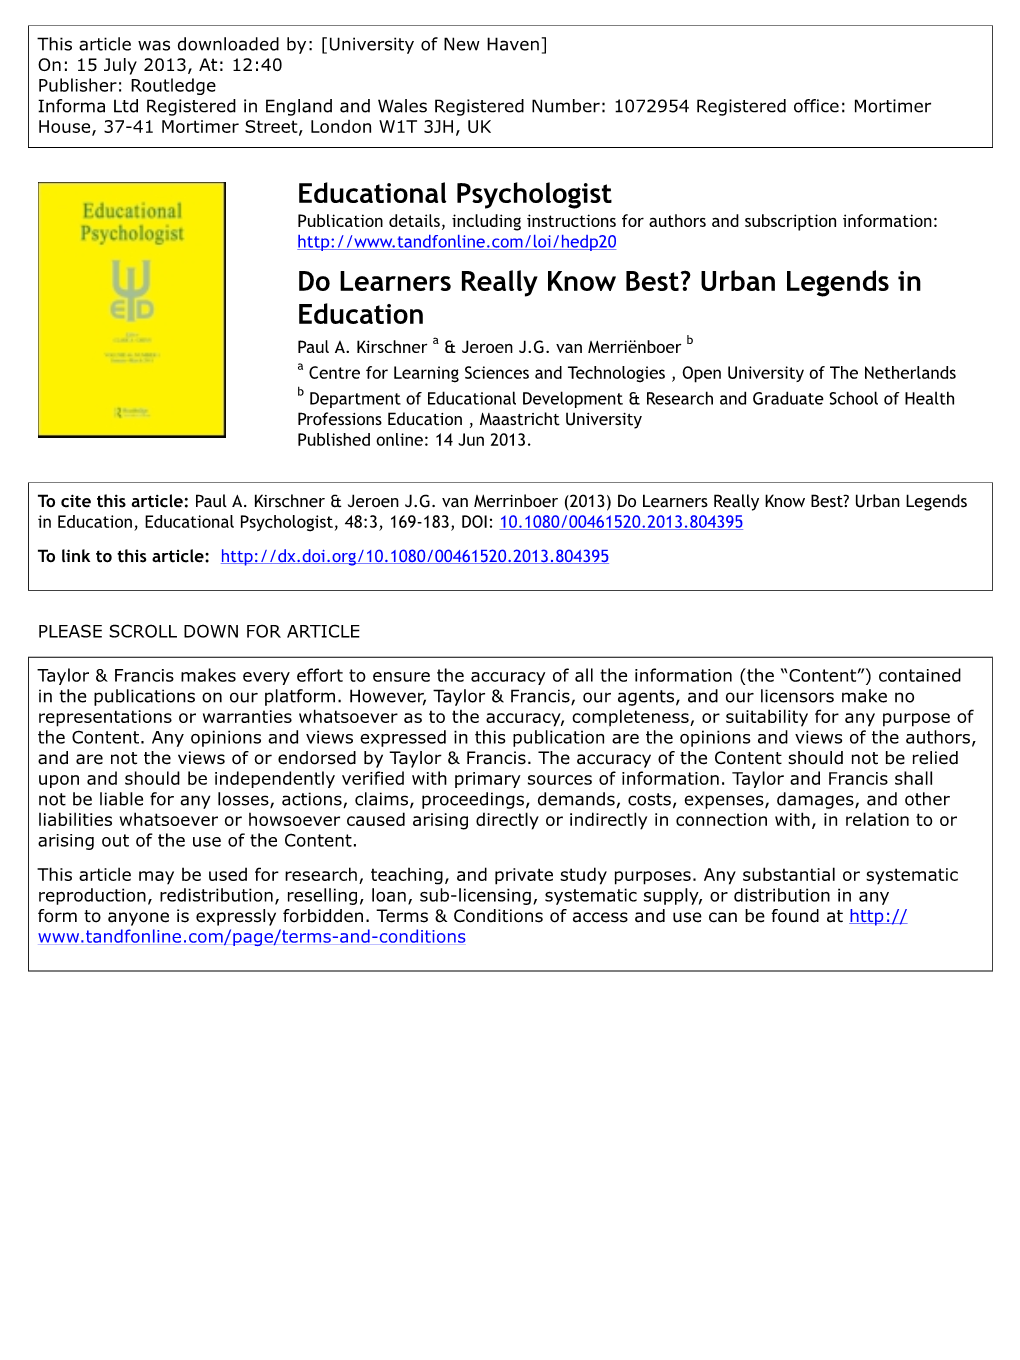 Do Learners Really Know Best? Urban Legends in Education Paul A